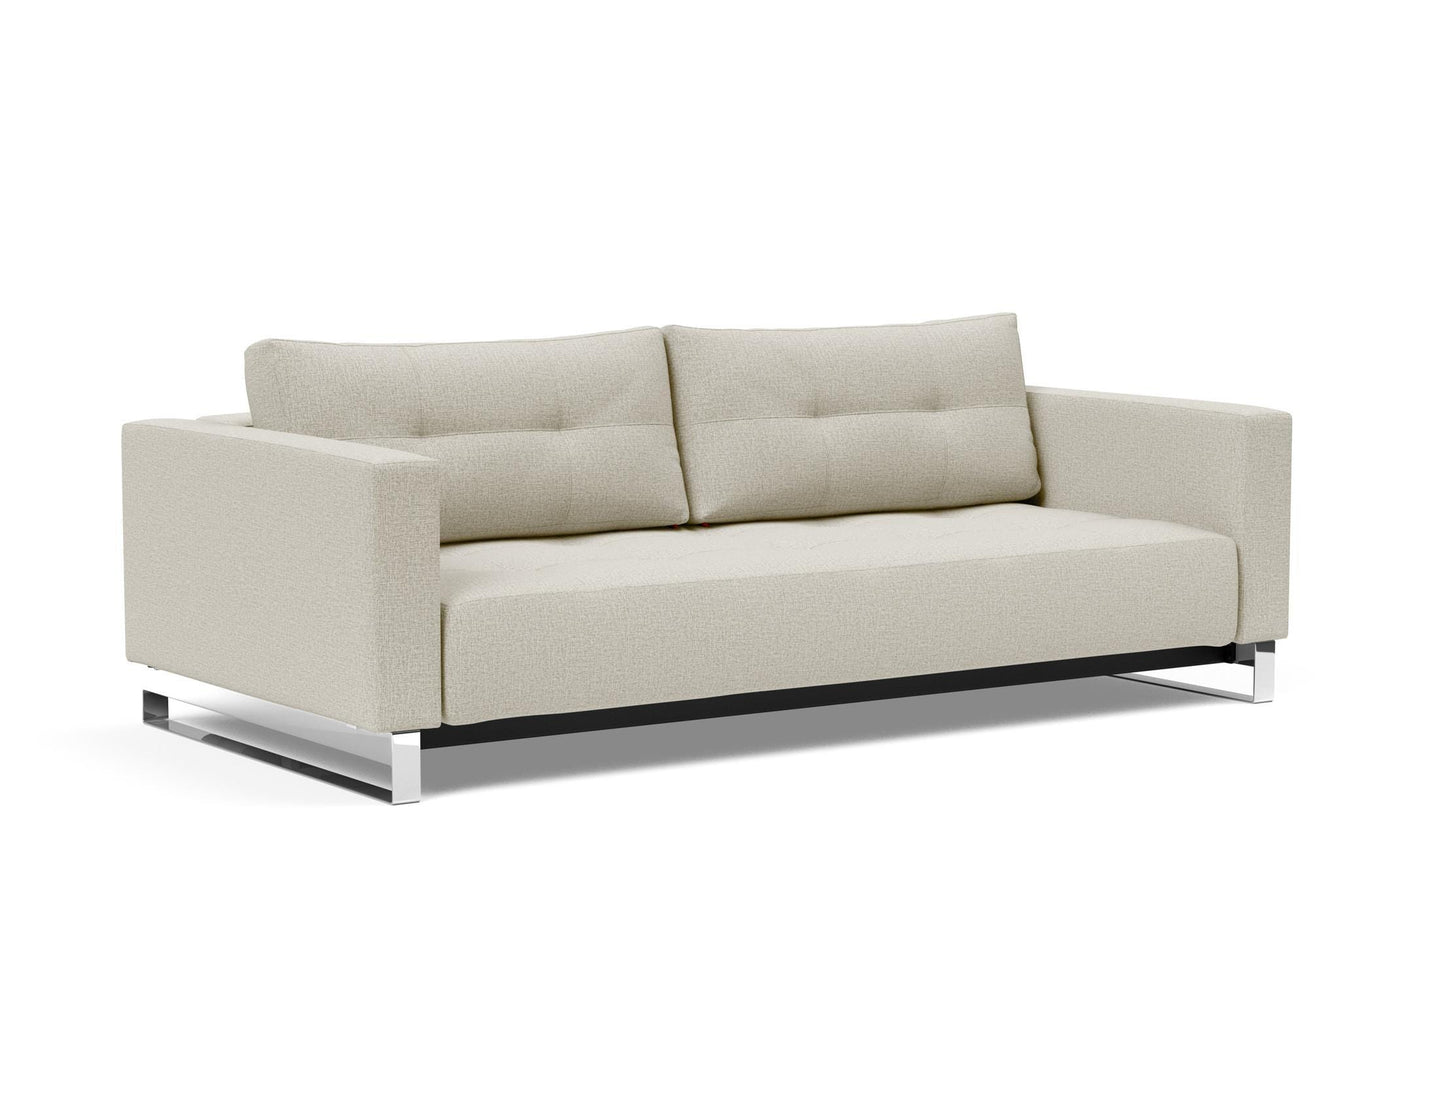 Innovation Living Cassius D.E.L. Chrome Sleeper Sofa Bed in Mixed Dance Natural